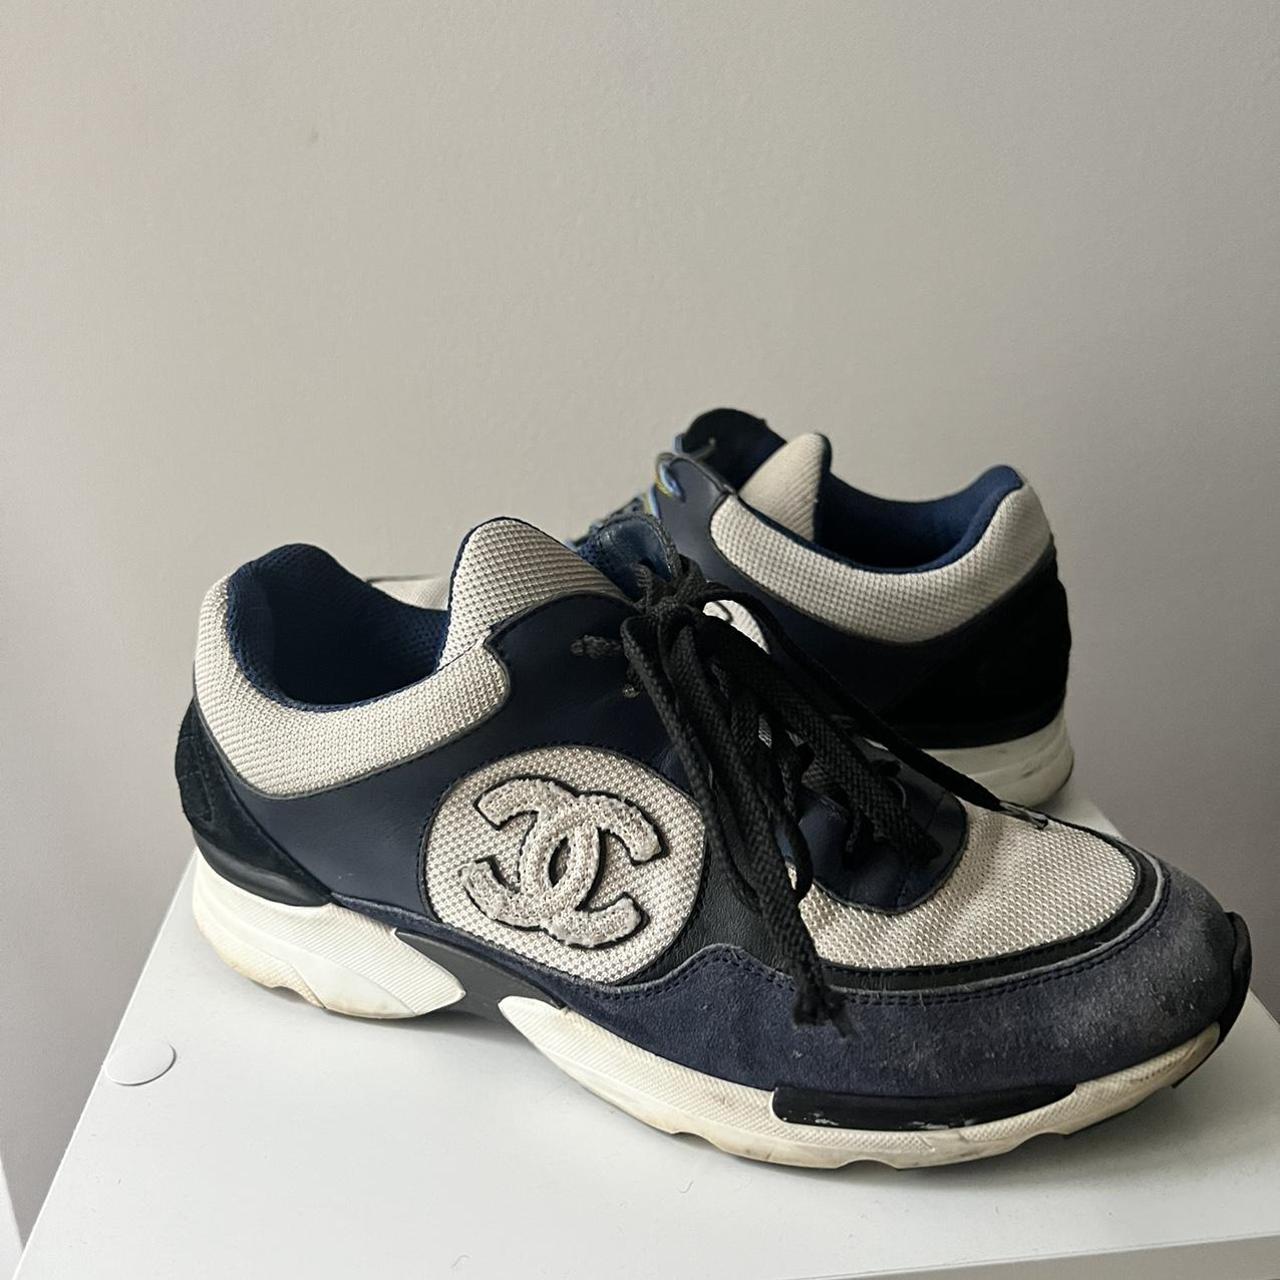 Authentic Chanel sneakers. Soooo cute but I just